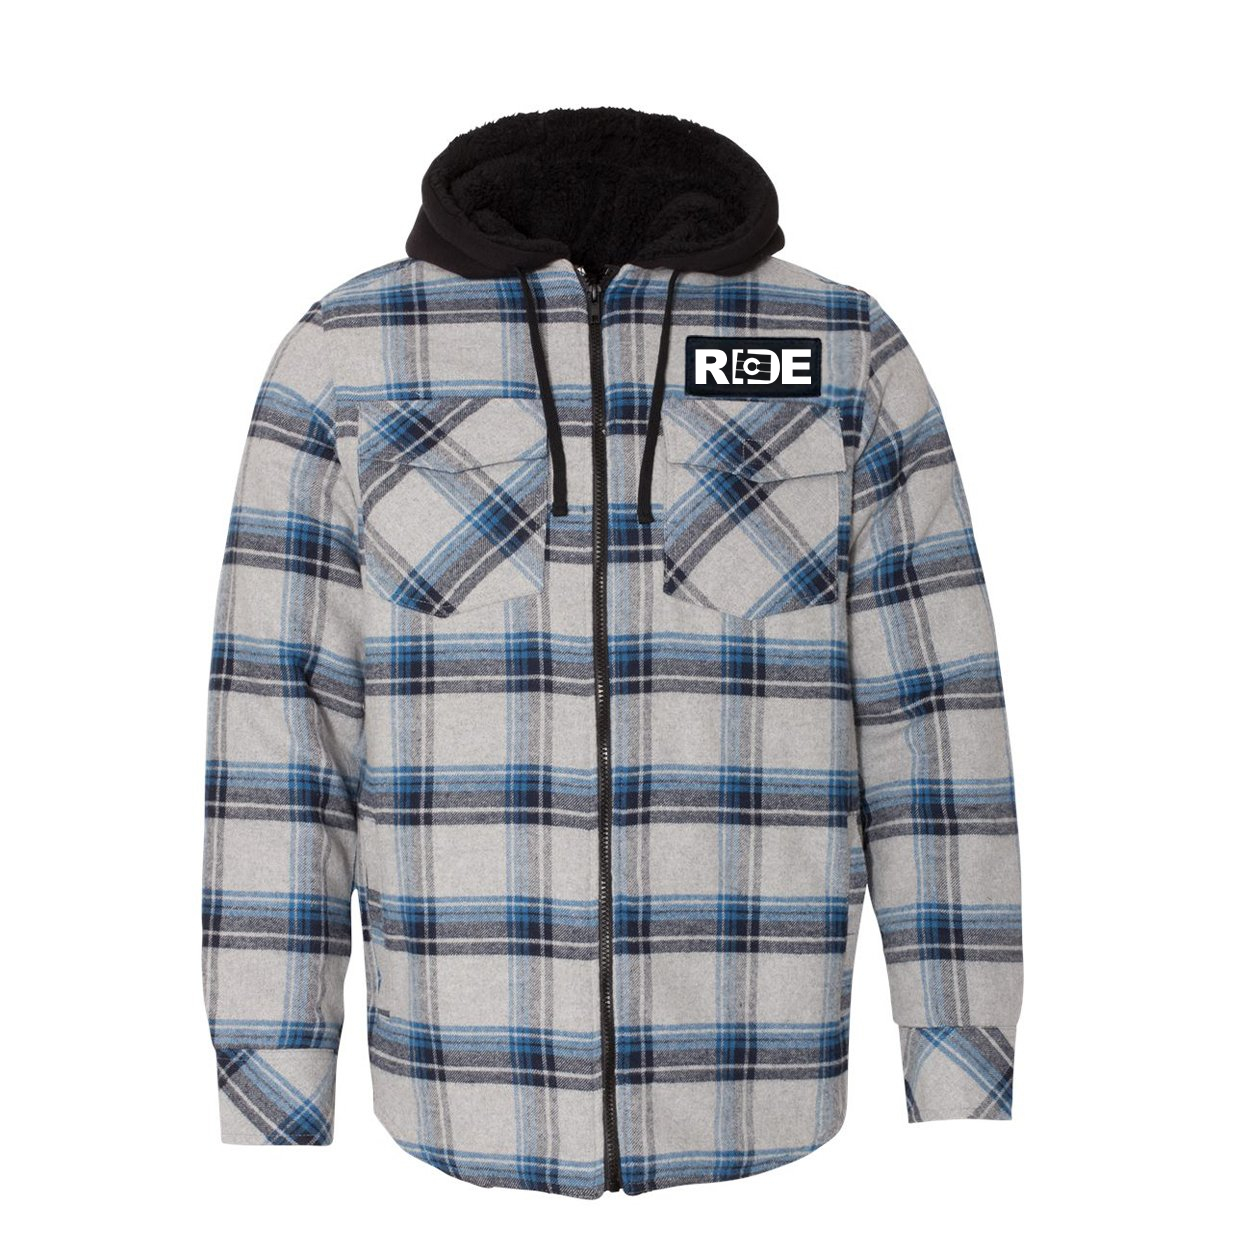 Ride Colorado Classic Unisex Full Zip Woven Patch Hooded Flannel Jacket Gray/ Blue (White Logo)